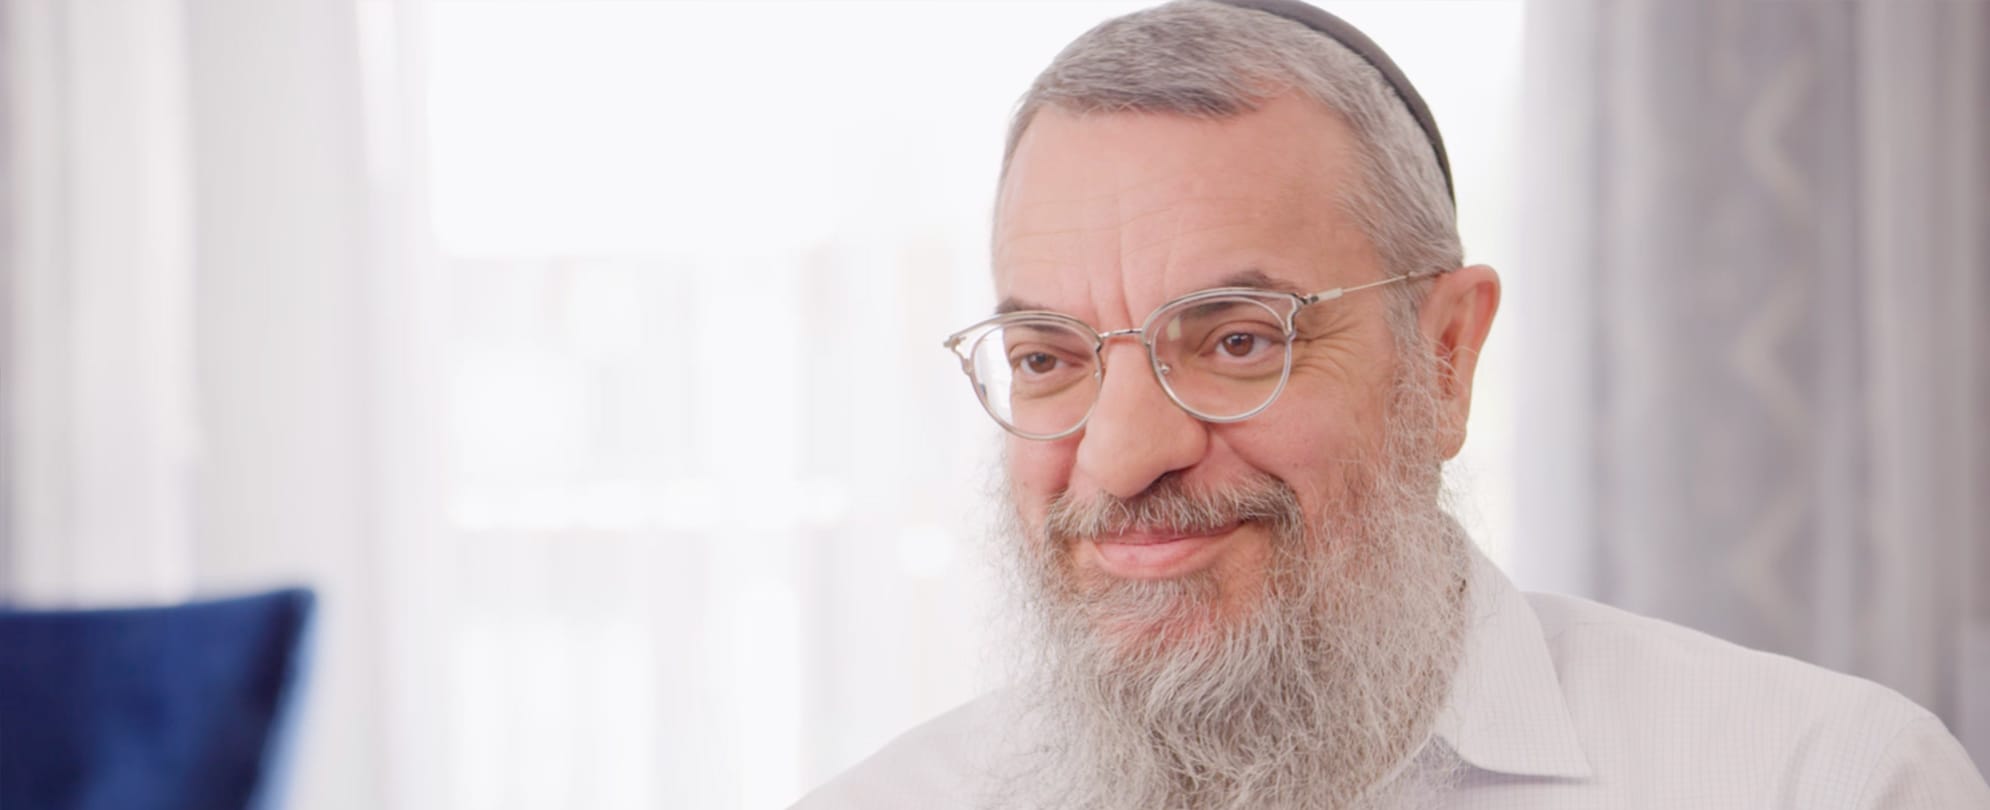 A timeshare owner wearing a kippah and candidly smiling away from the camera